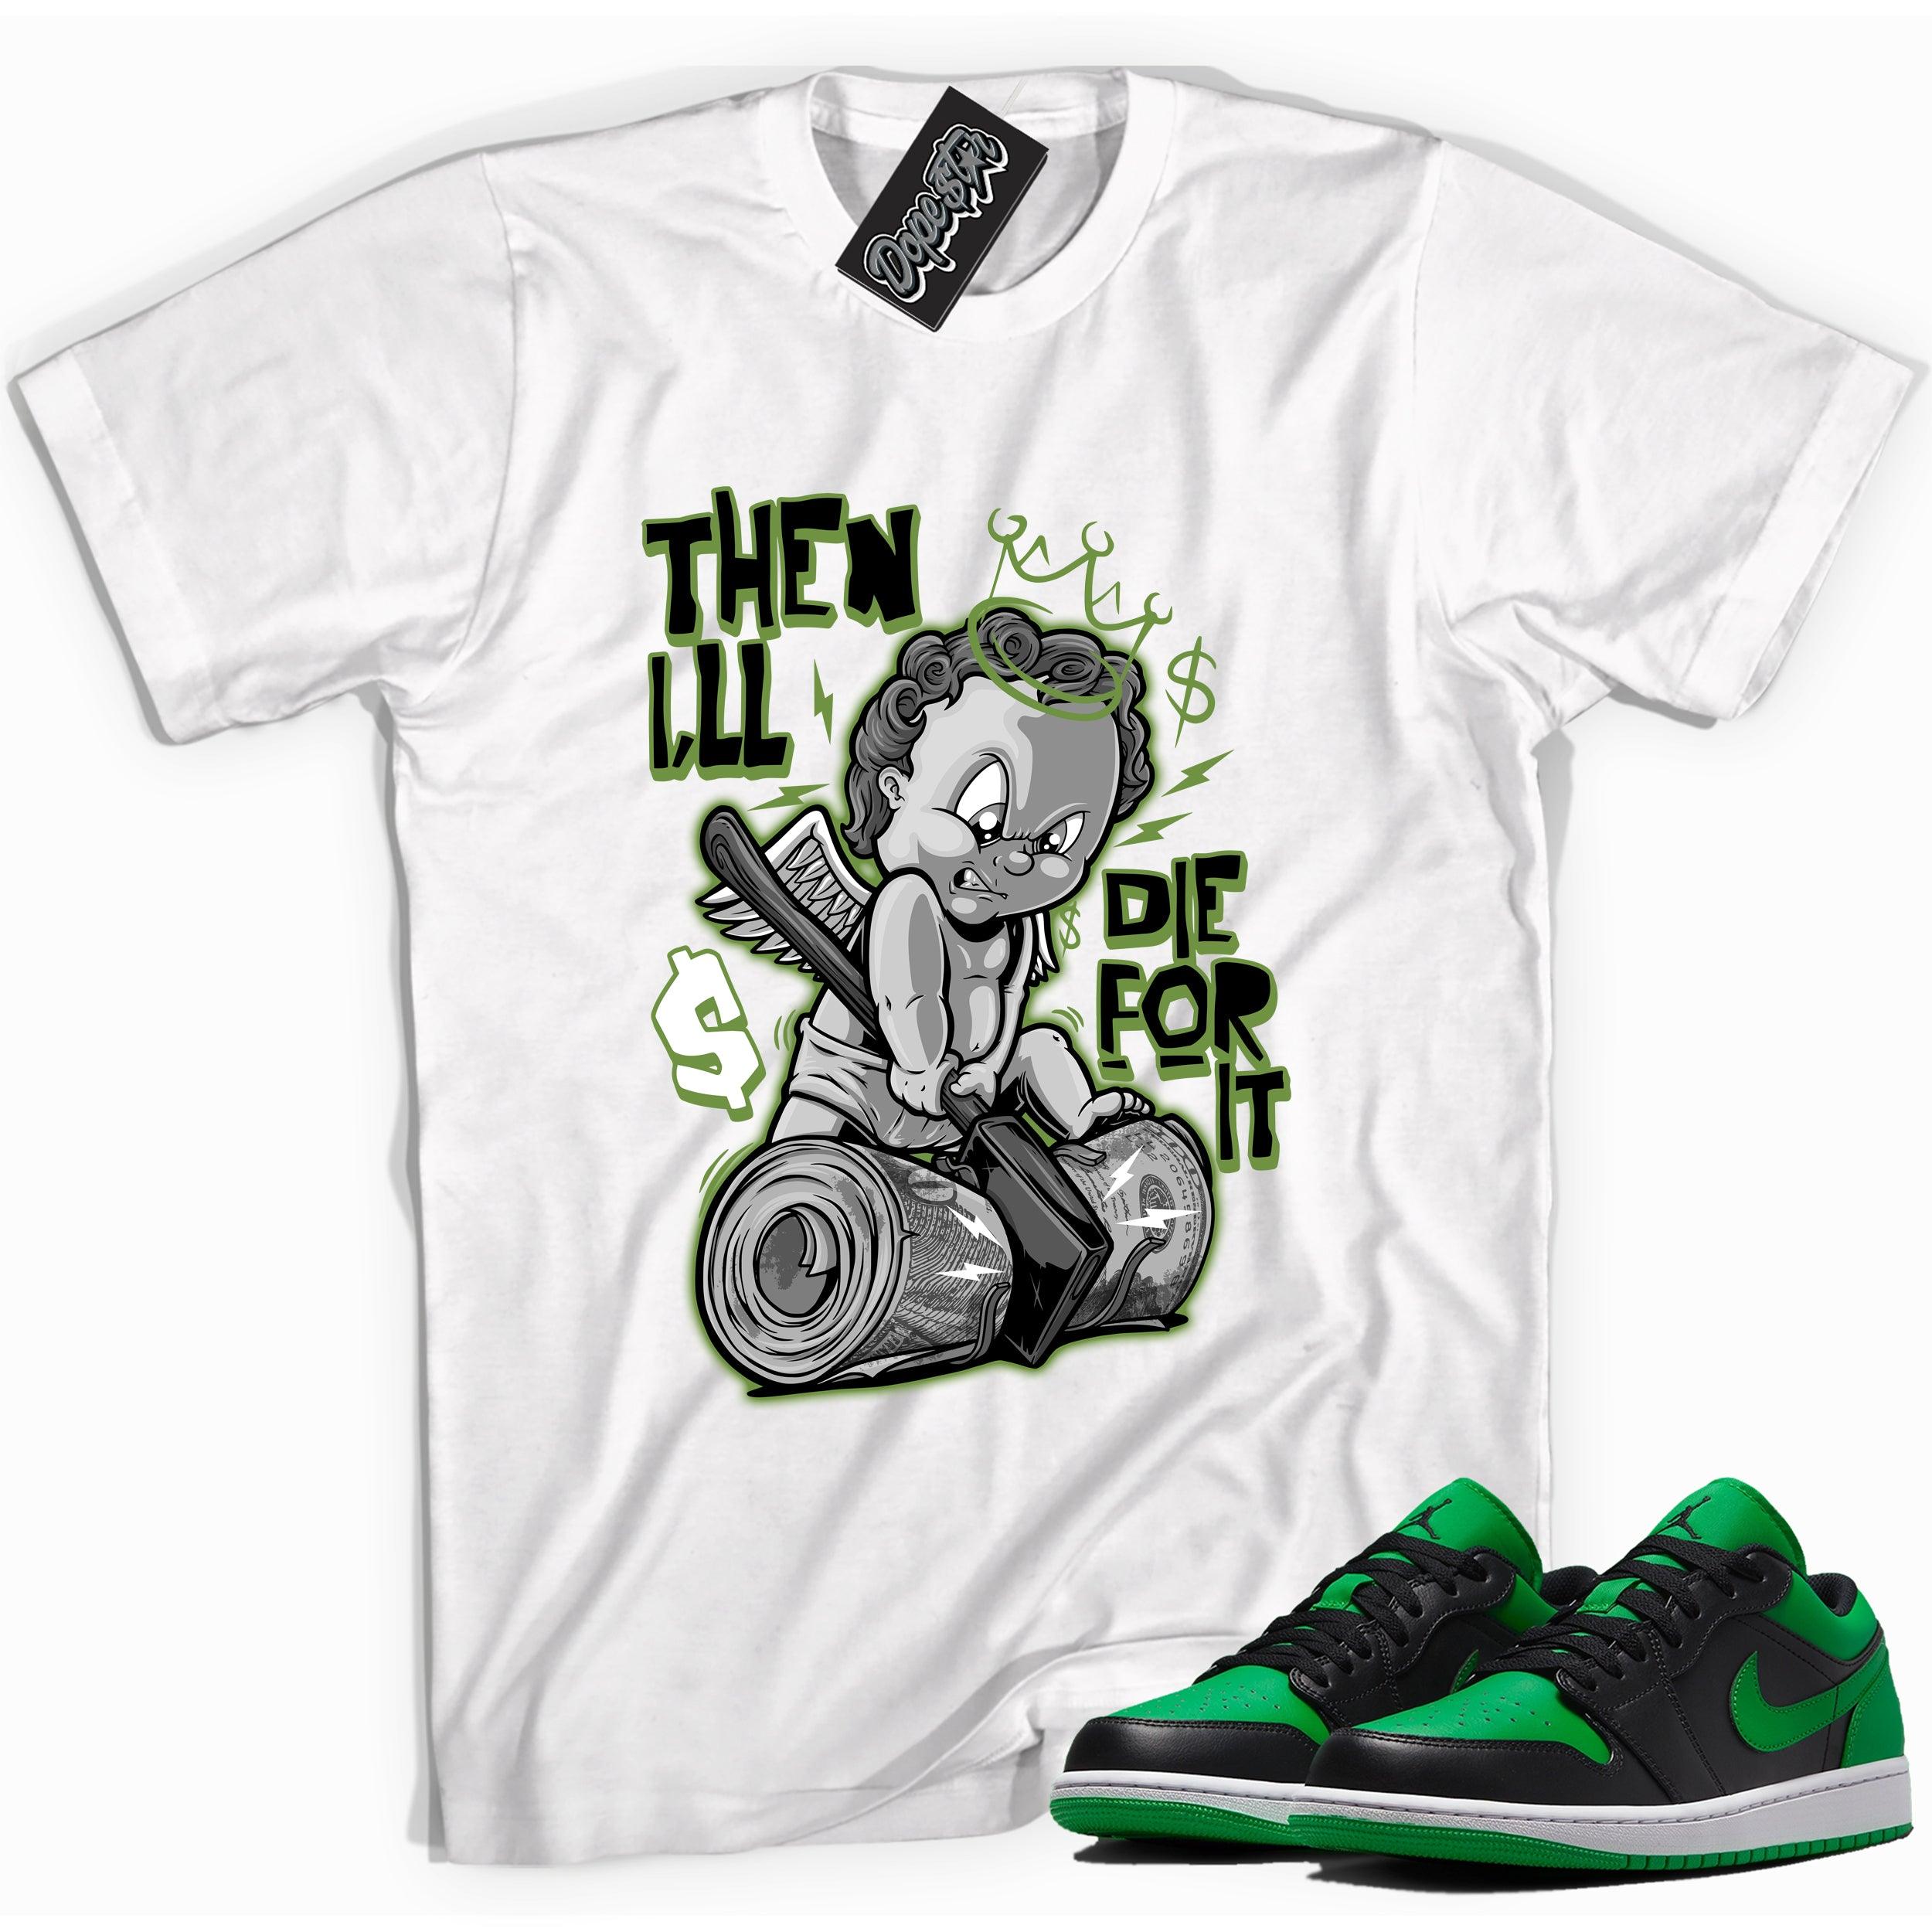 Cool white graphic tee with 'Then I'll Die For It" print, that perfectly matches Air Jordan 1 Low Lucky Green Sneakers